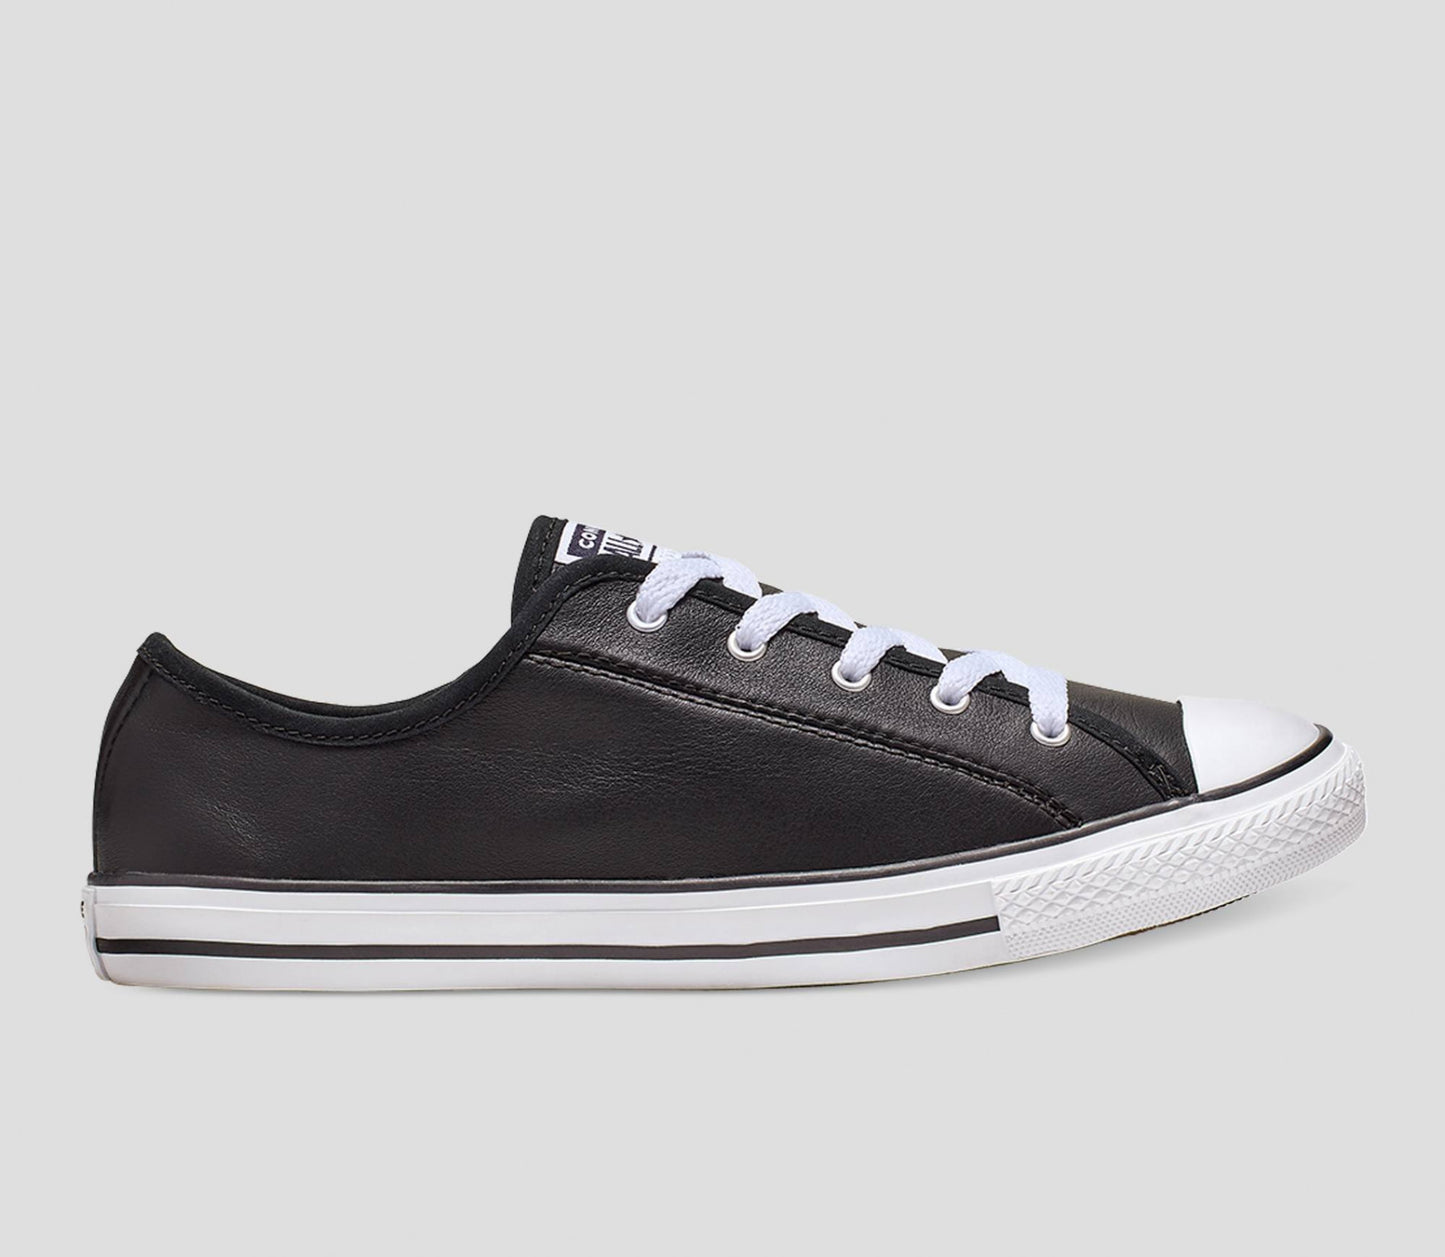 CONVERSE Chuck Taylor All Star Womens Leather Dainty Shoe - Black/White/White - VENUE.